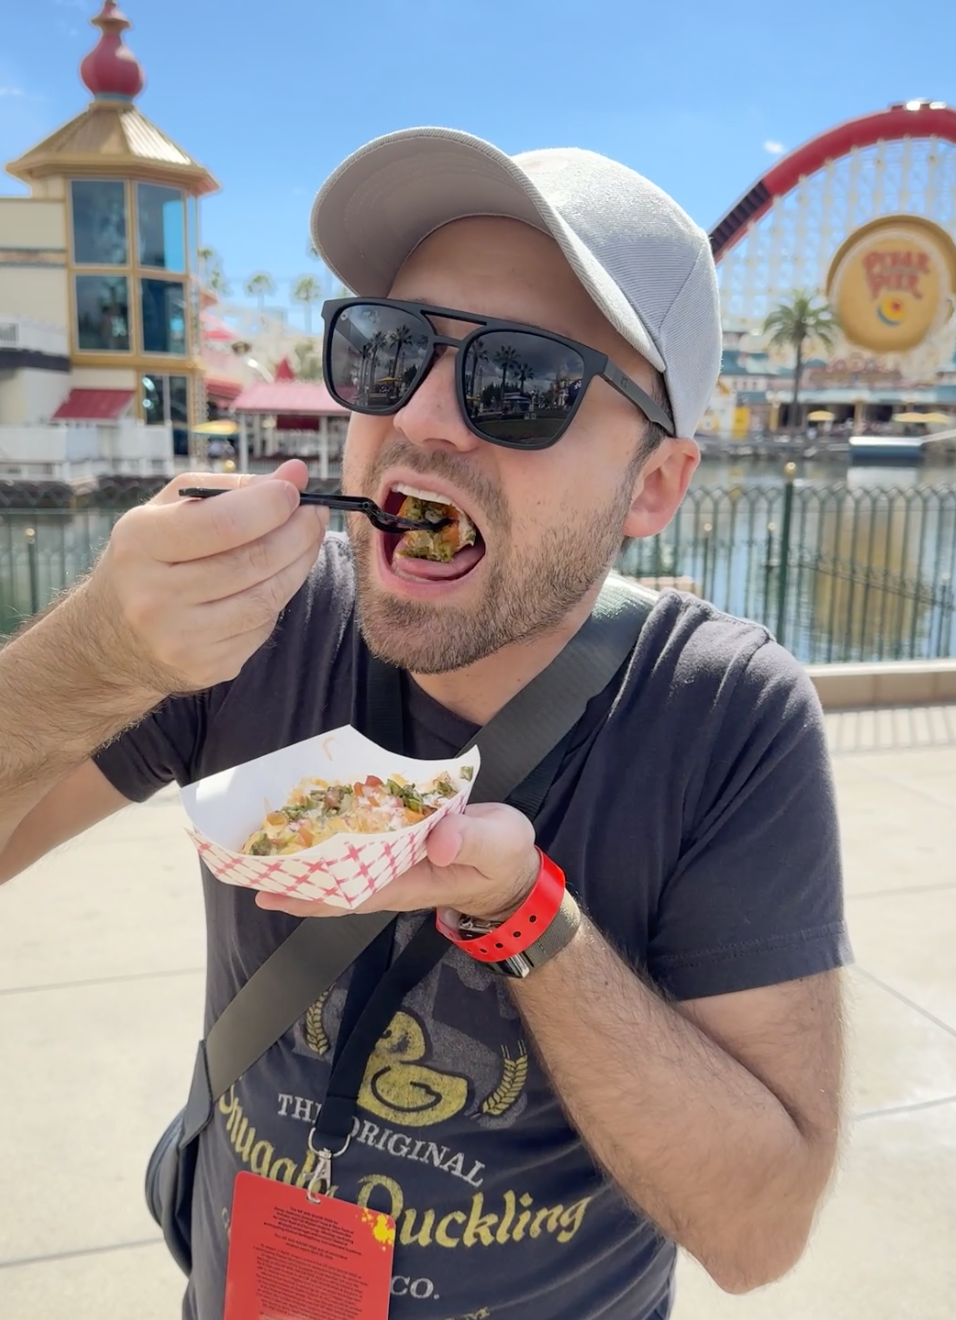 Person eating from a bowl at an outdoor amusement park, wearing a cap, sunglasses, and a graphic t-shirt